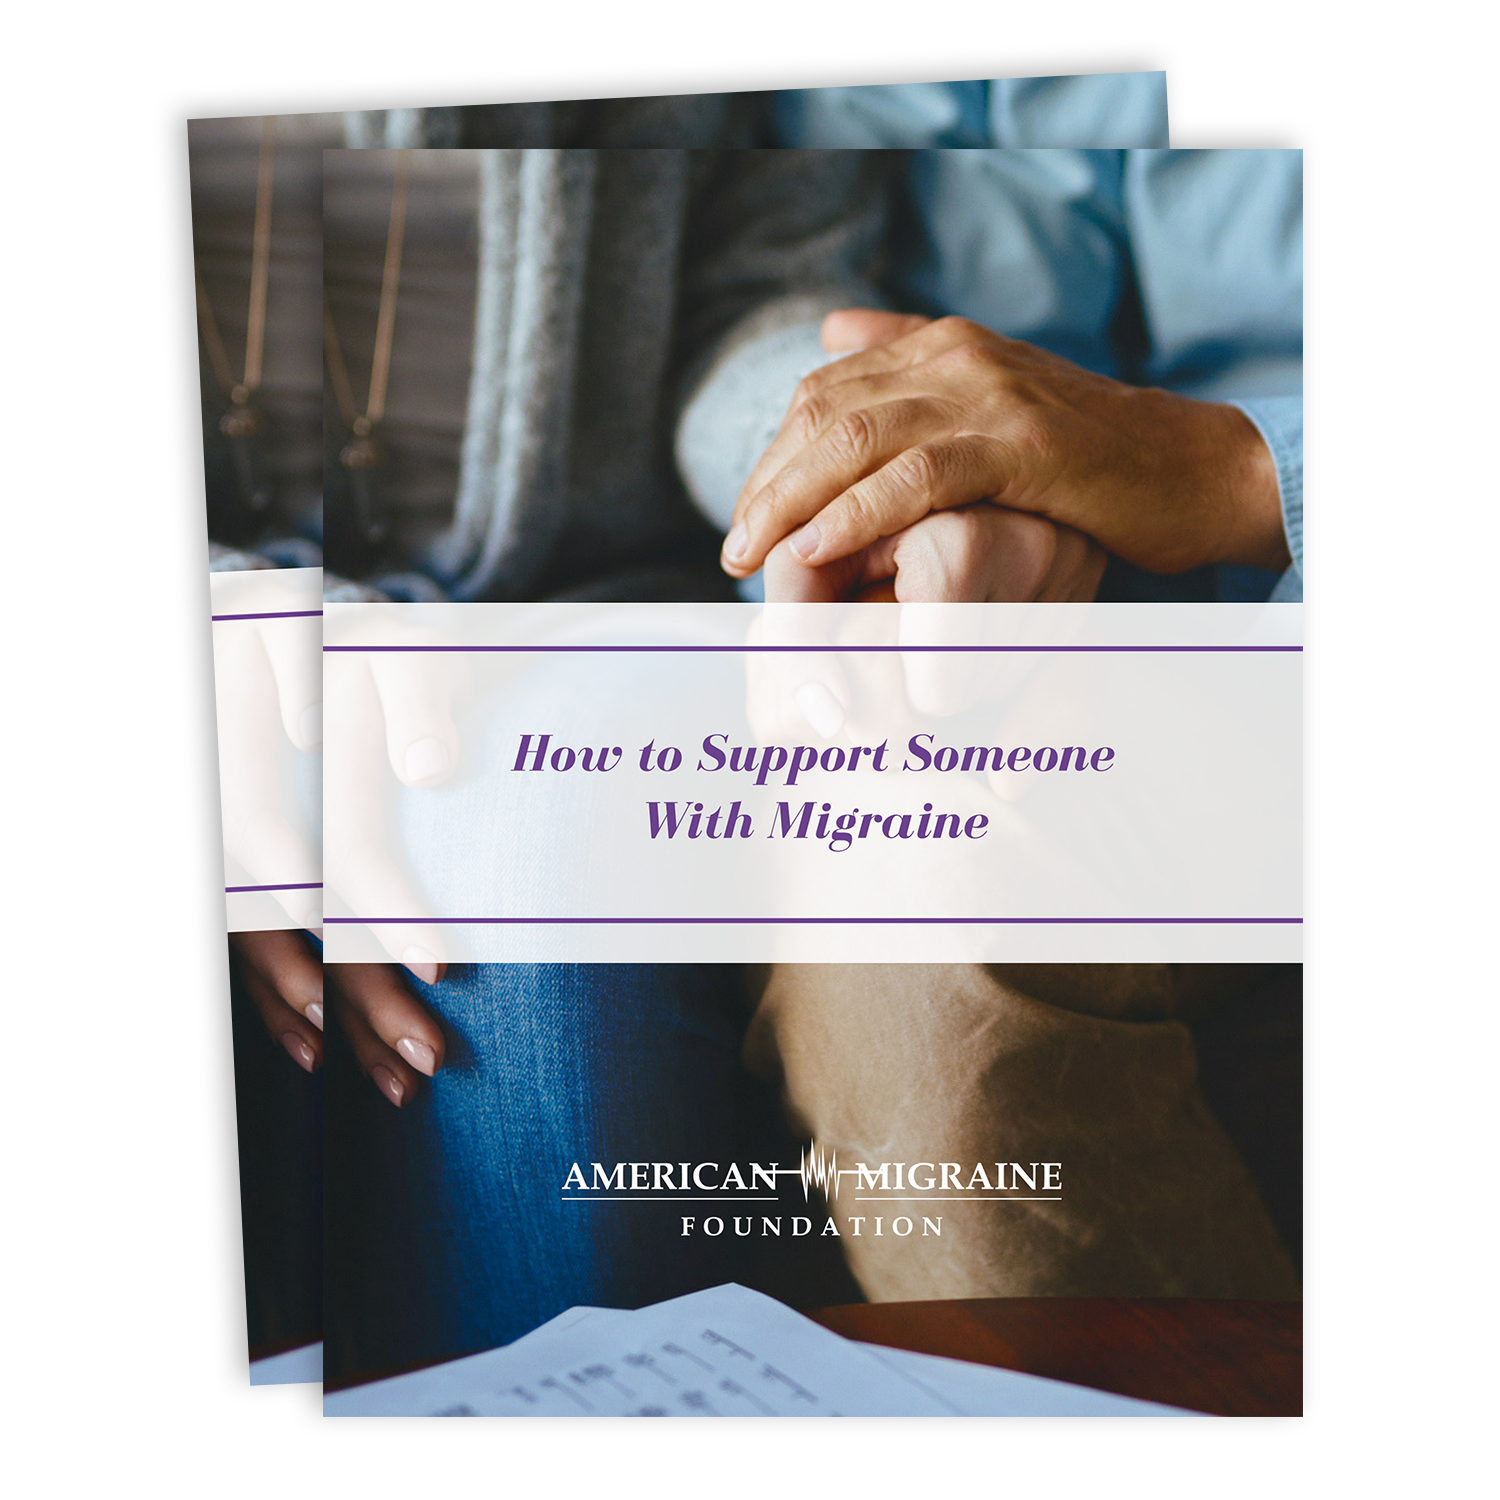 Download our guide on how to support someone with migraine.